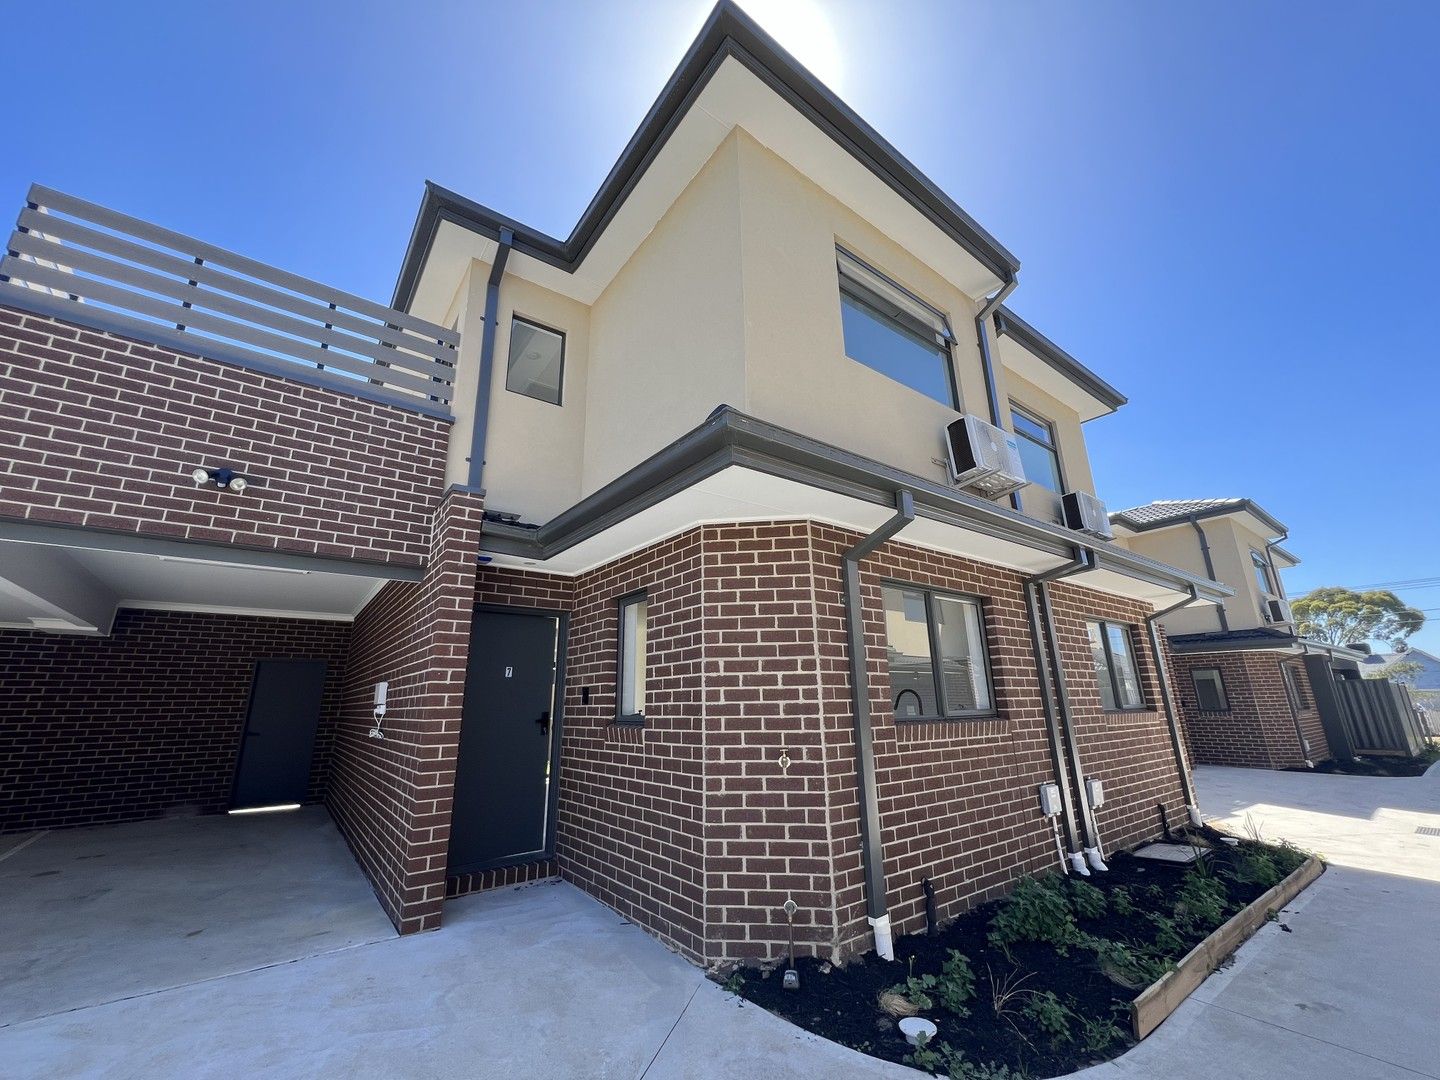 2 bedrooms Townhouse in 7/95 Lahinch St BROADMEADOWS VIC, 3047